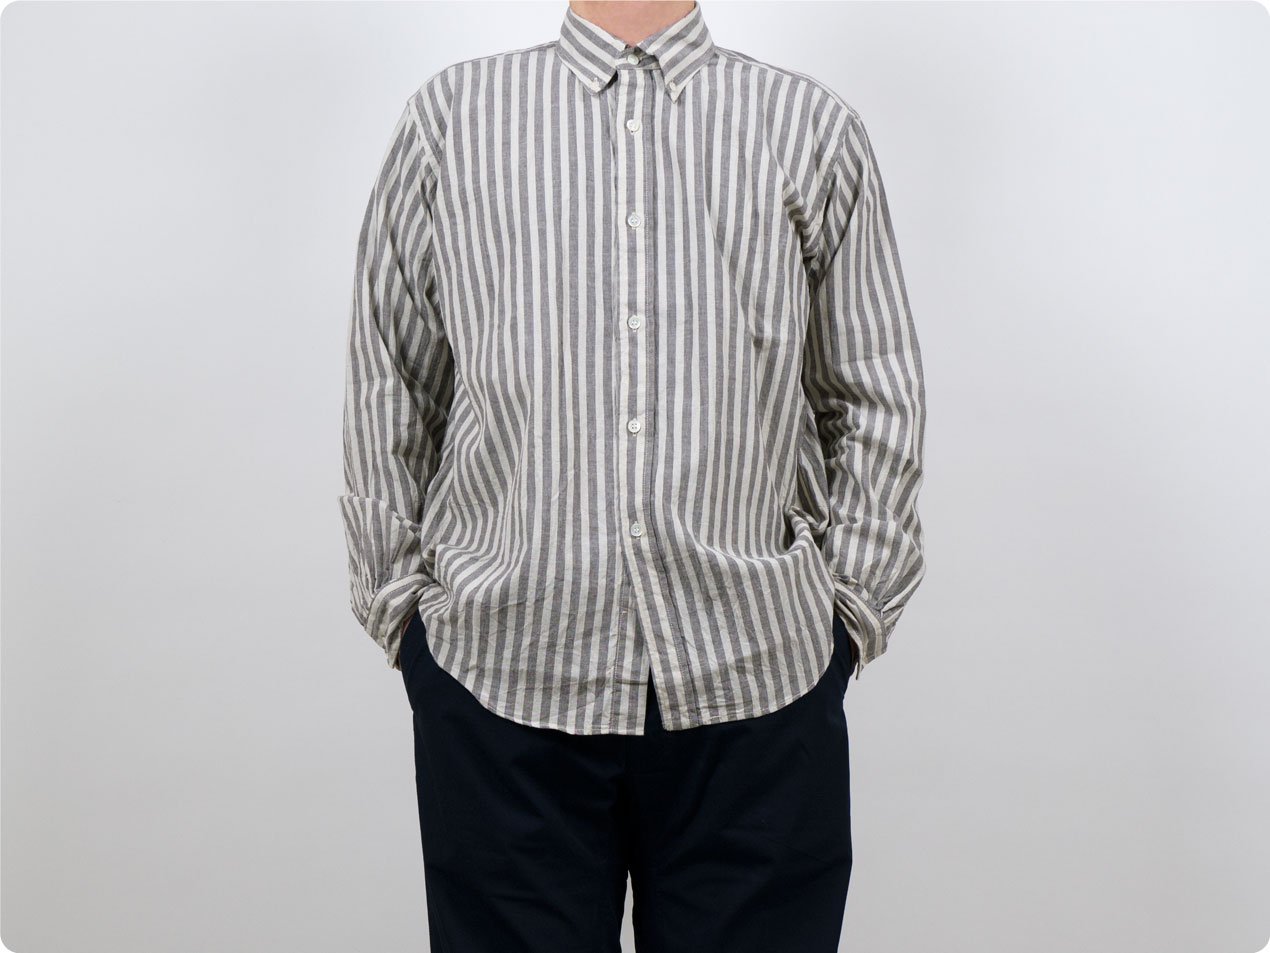 ENDS and MEANS B.D. Shirts BROWN STRIPE